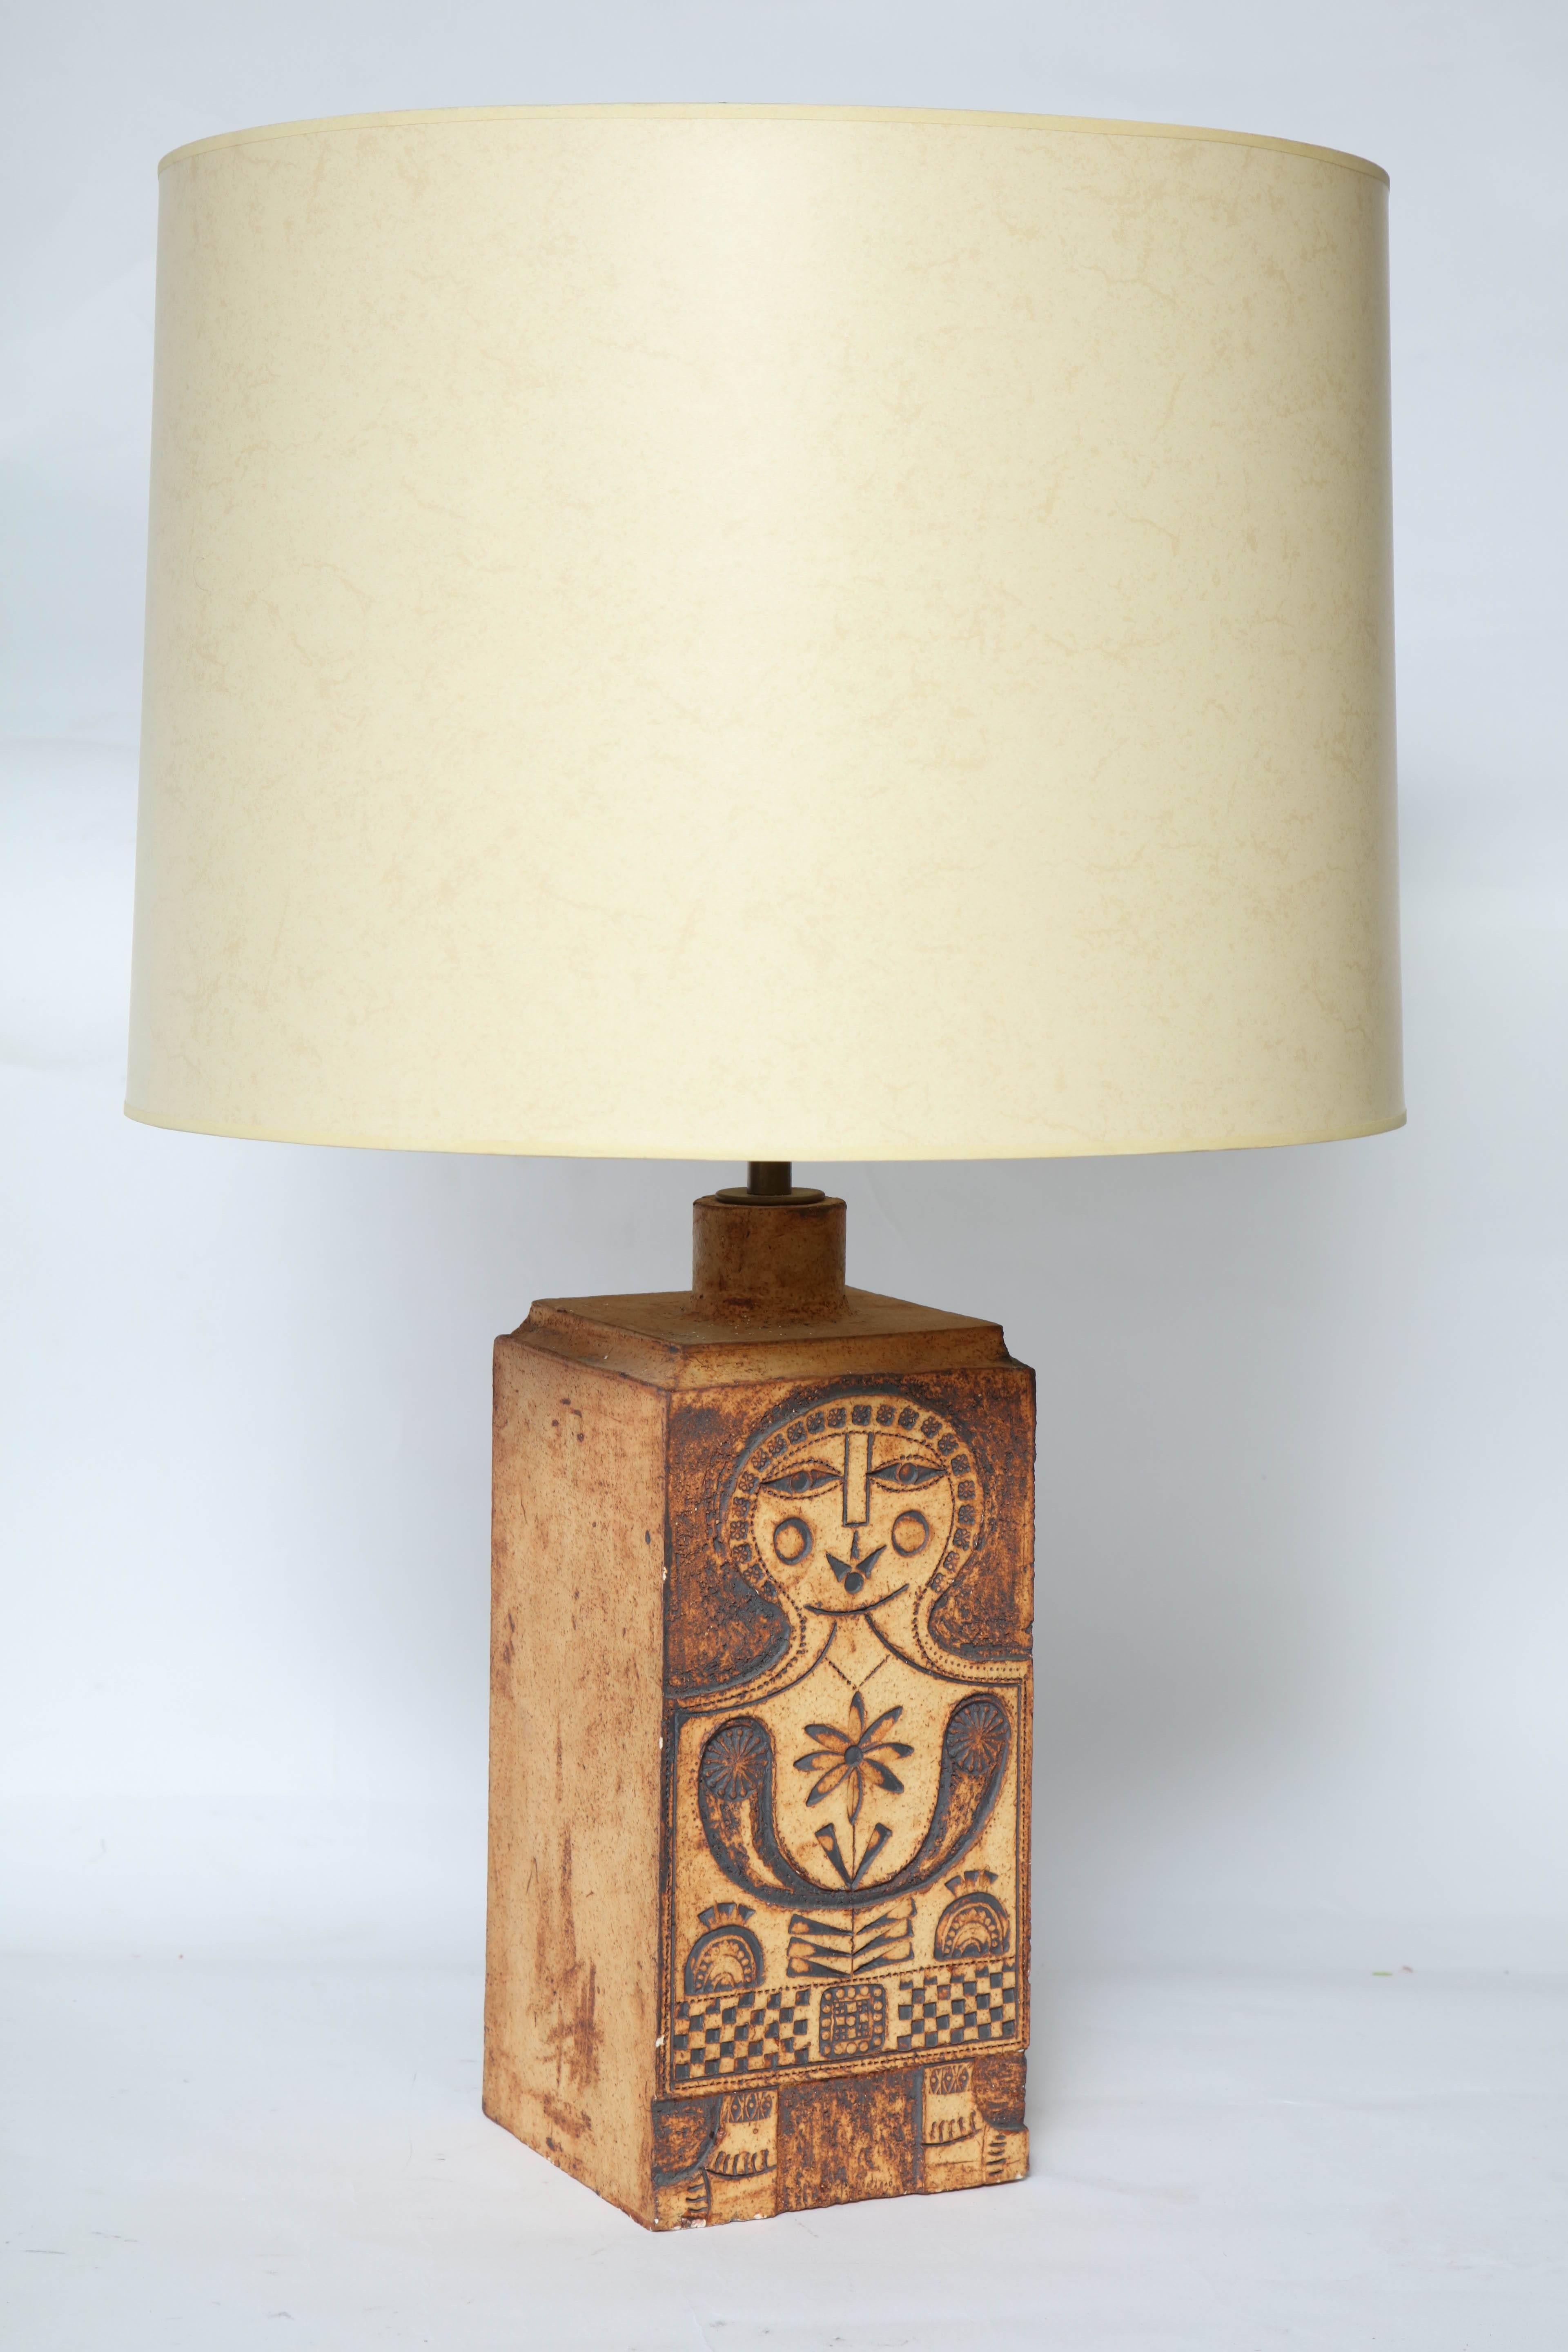 French Mid-Century Modern Ceramic Table Lamp Signed Capron Valauris, Paris France